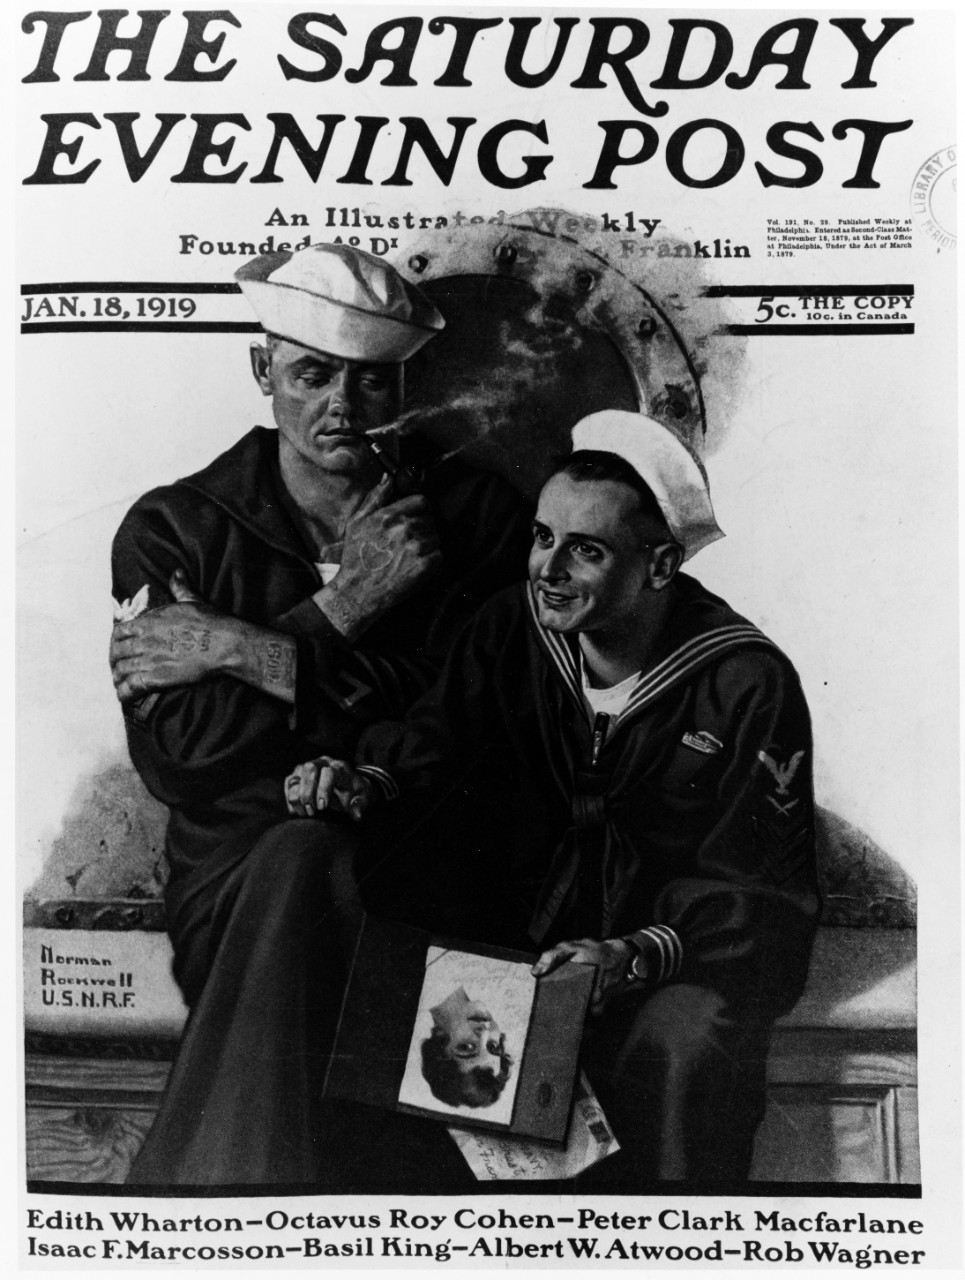 The Saturday Evening Post Cover, January 18, 1919.   NHHC Photograph Collection, NH 78620-KN. 